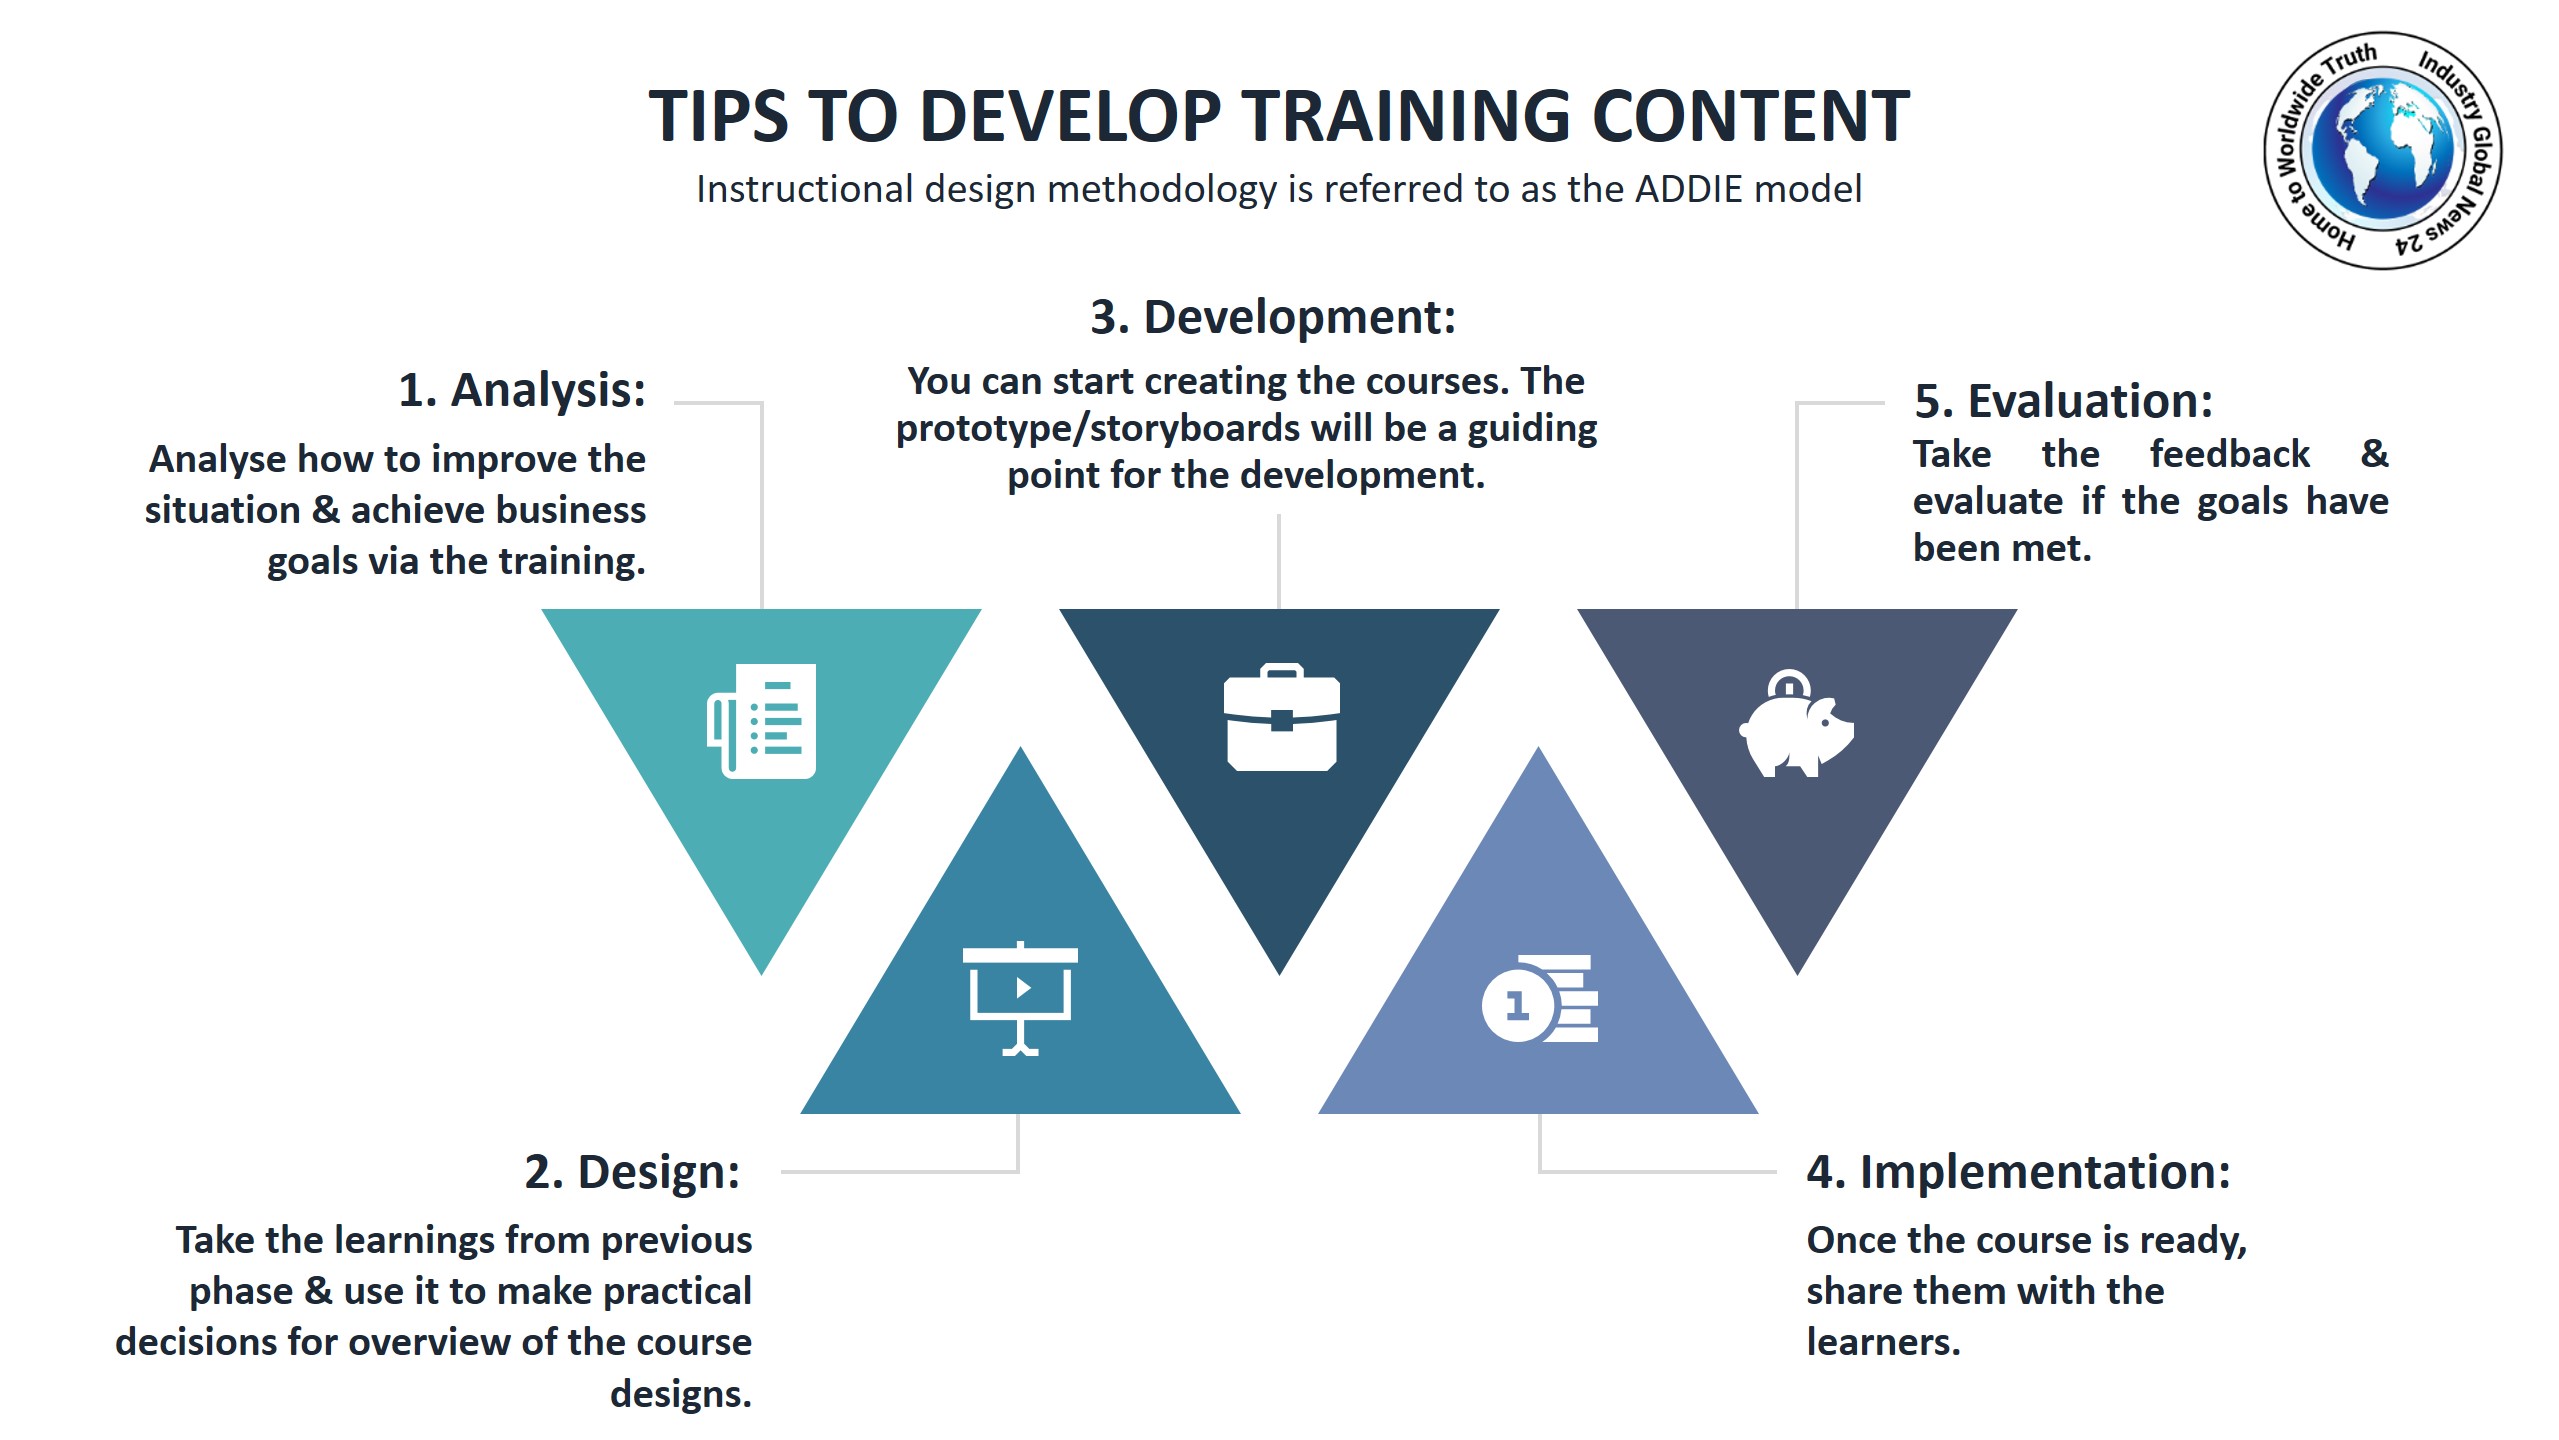 Tips to develop training content